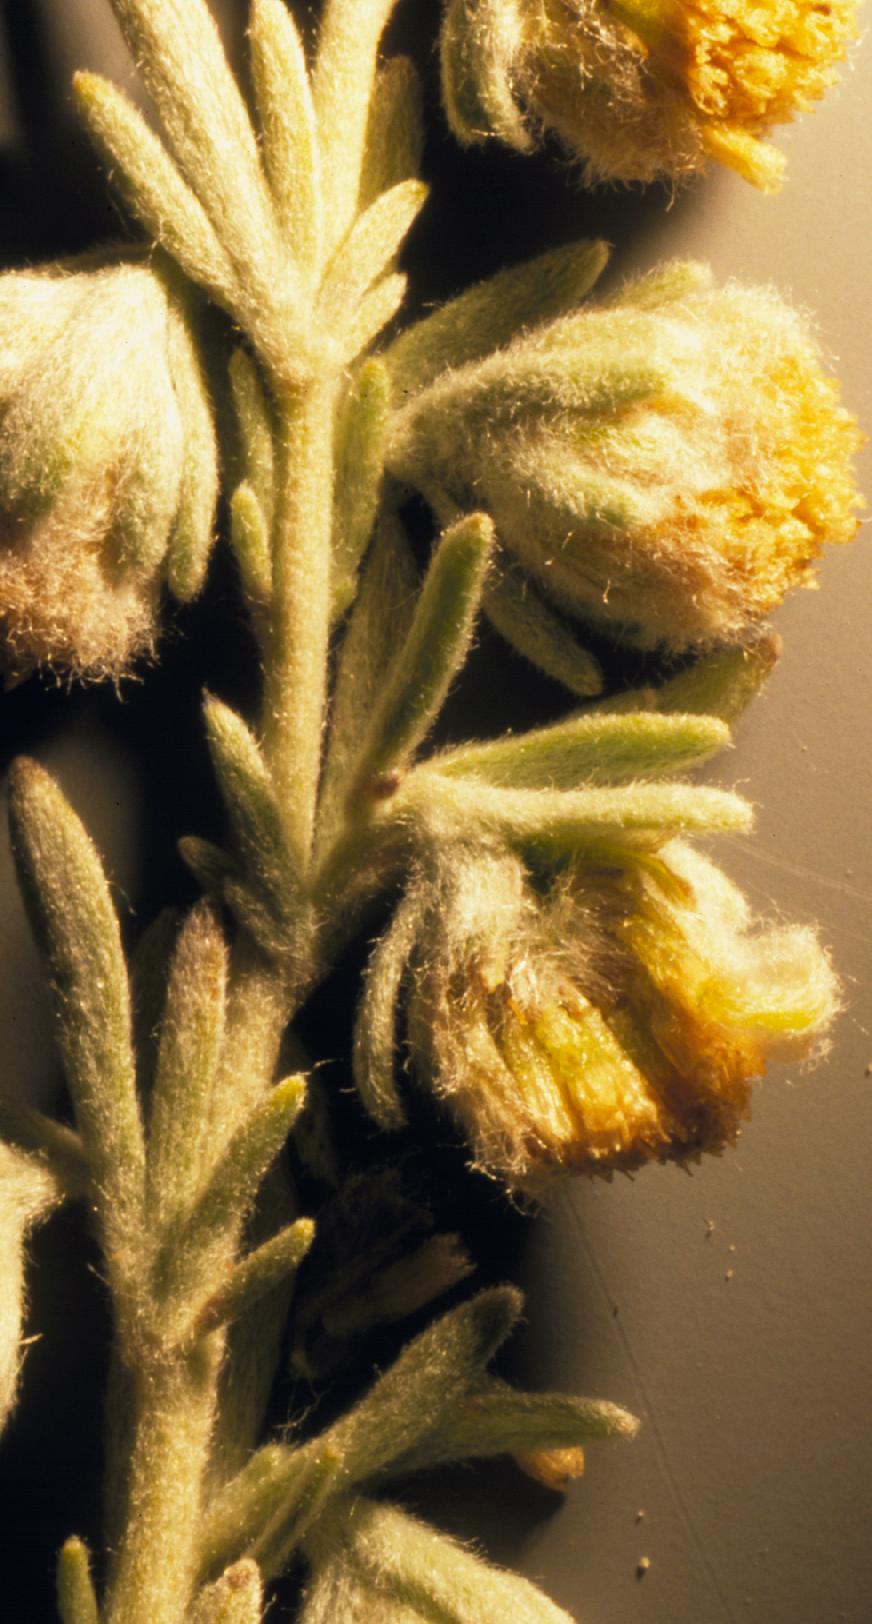 Close-up of inflorescence showing fuzzy stems, small leaves, and tiny yellow flowers surrounded by fuzzy bracts